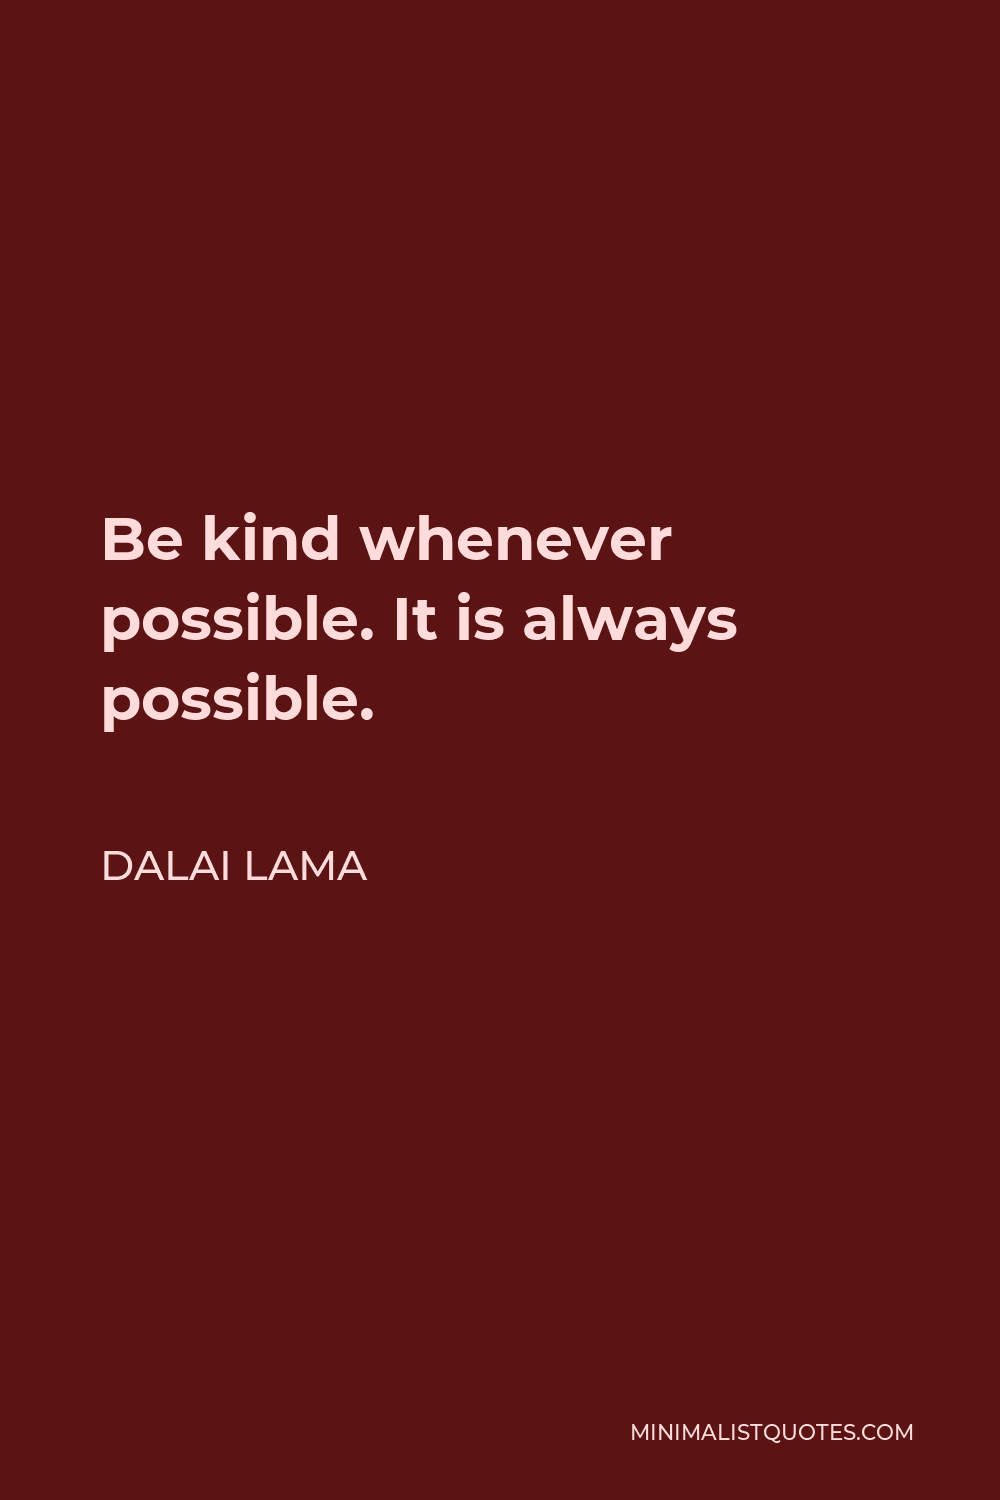 Dalai Lama Quote: Be kind whenever possible. It is always possible.